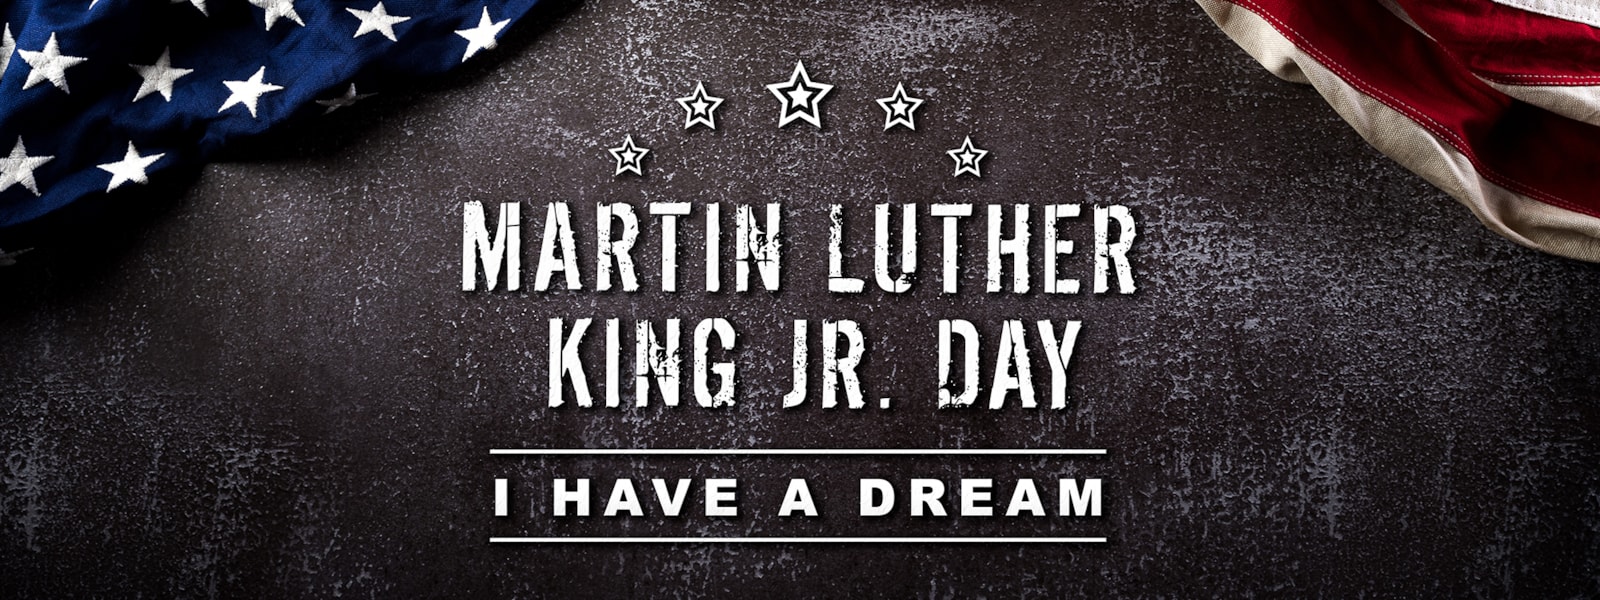 Martin Luther King Jr. Day, I have a dream with American flag